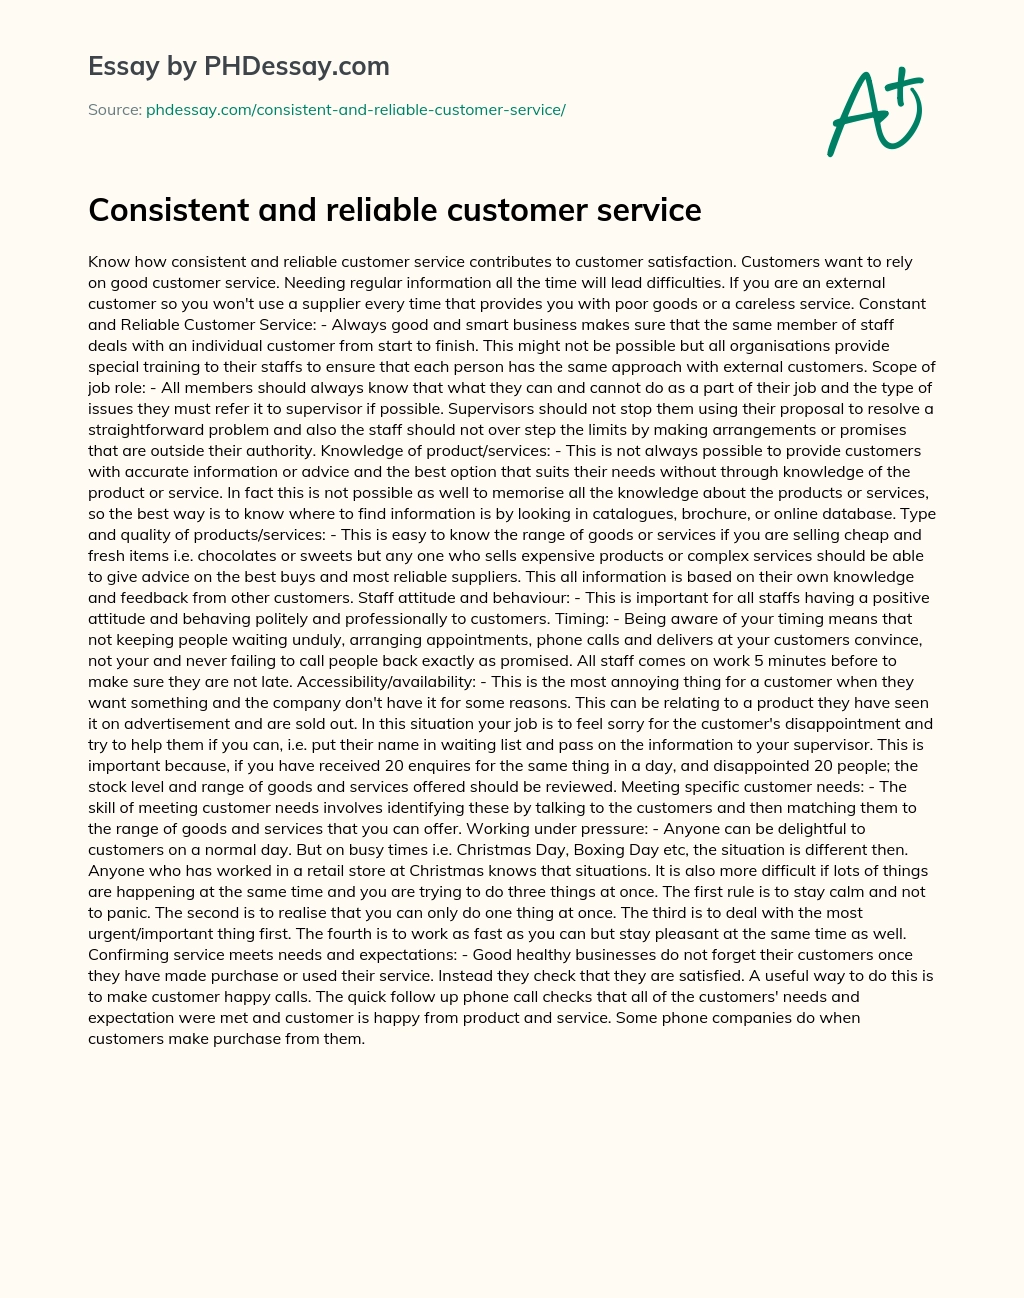 Consistent and Reliable Customer Service essay